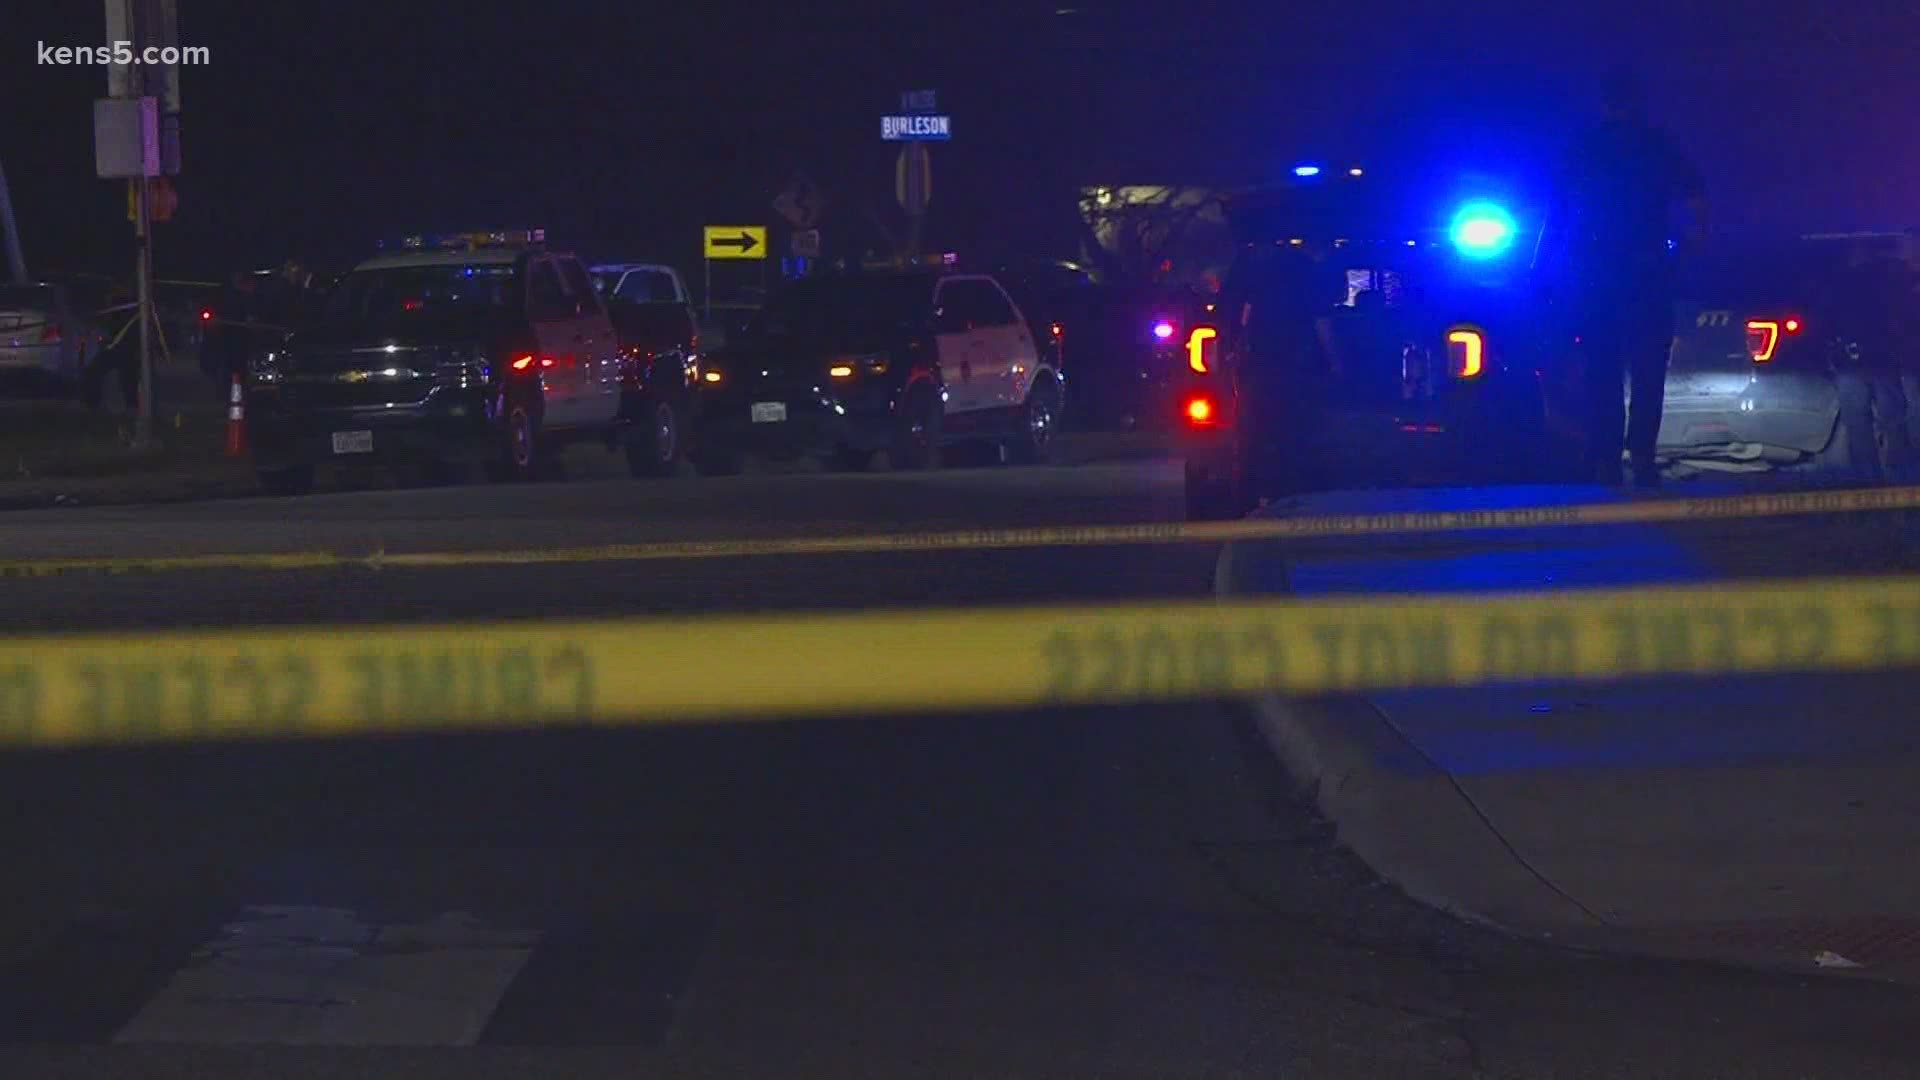 A man was killed by San Antonio Police officers responding to the scene of a shooting on the east side Friday night, authorities say.